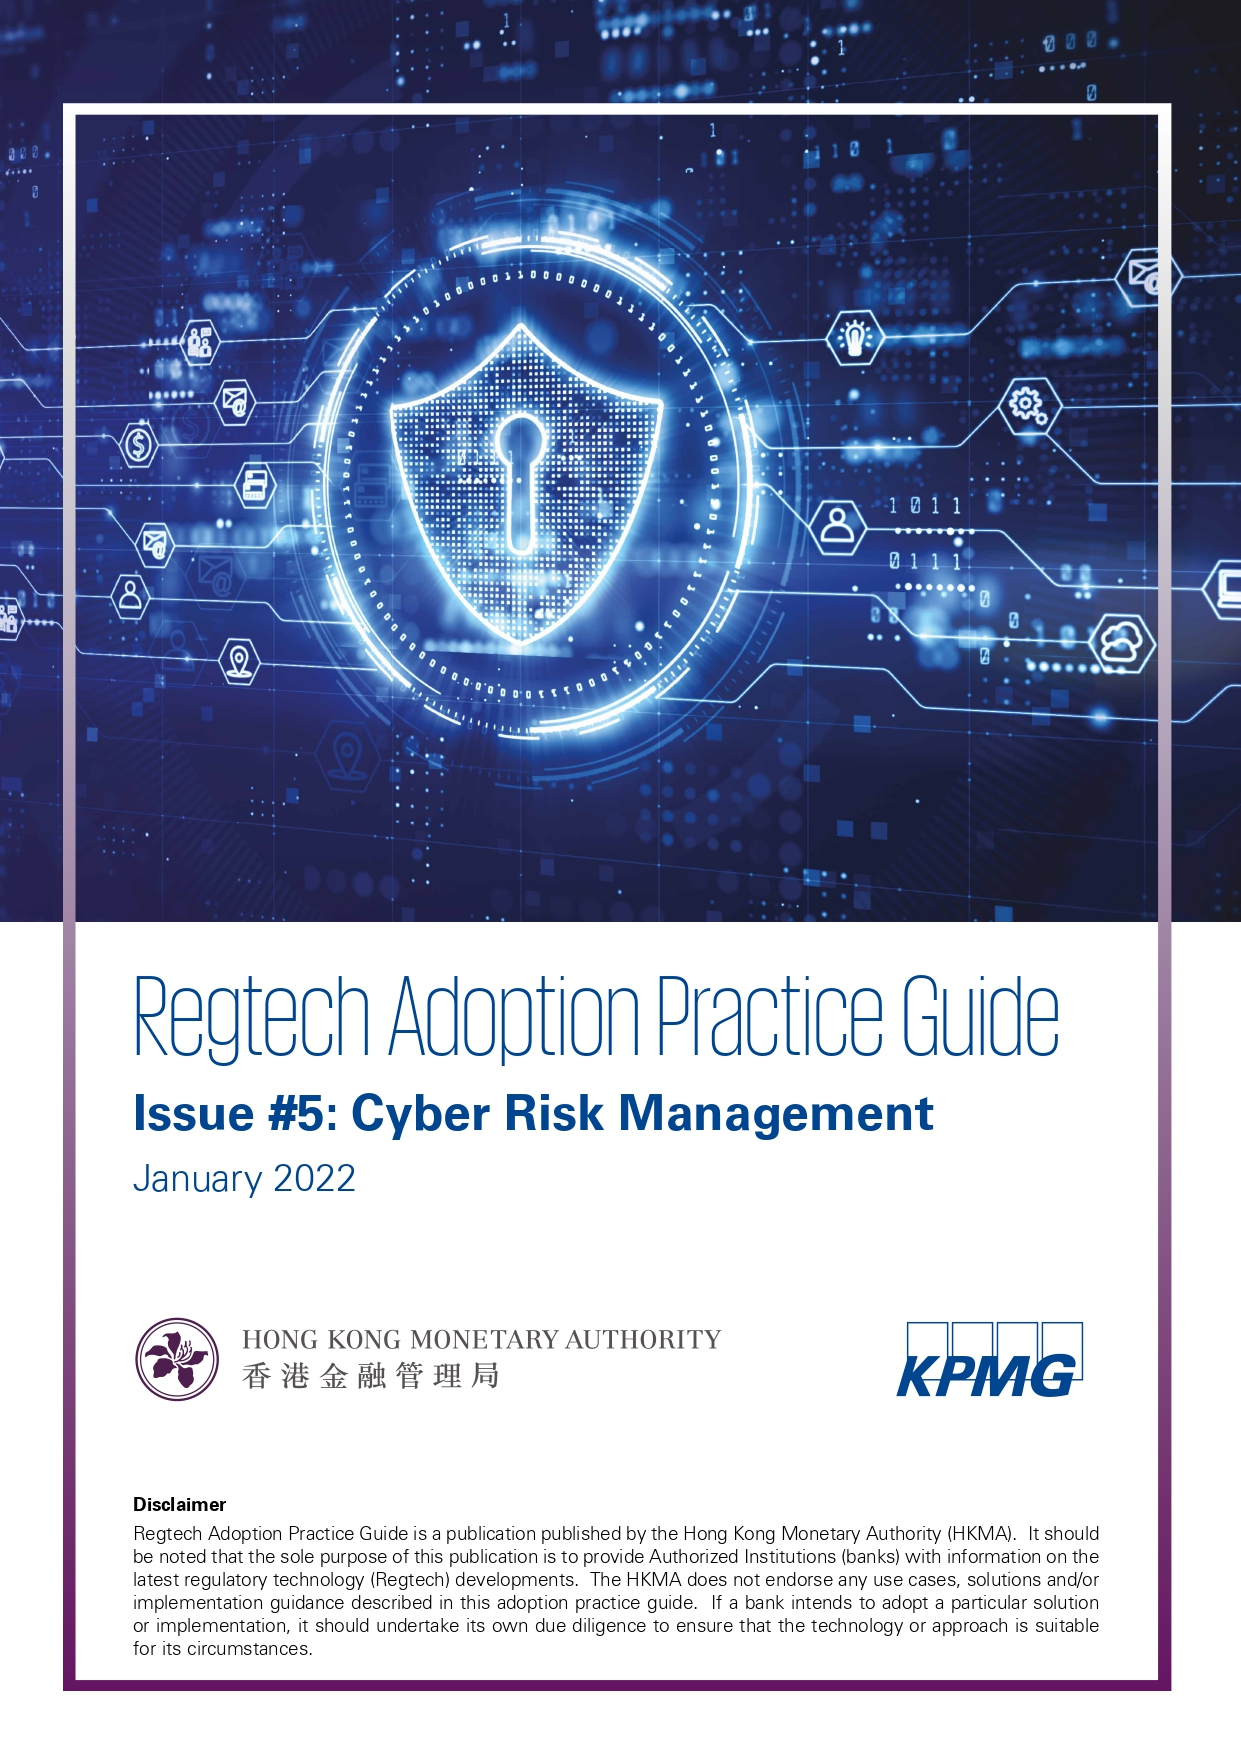 SafeGuardChain® as a reference case of ‘Regtech Adoption Practice Guide’ by  Hong Kong Monetary Authority (HKMA)